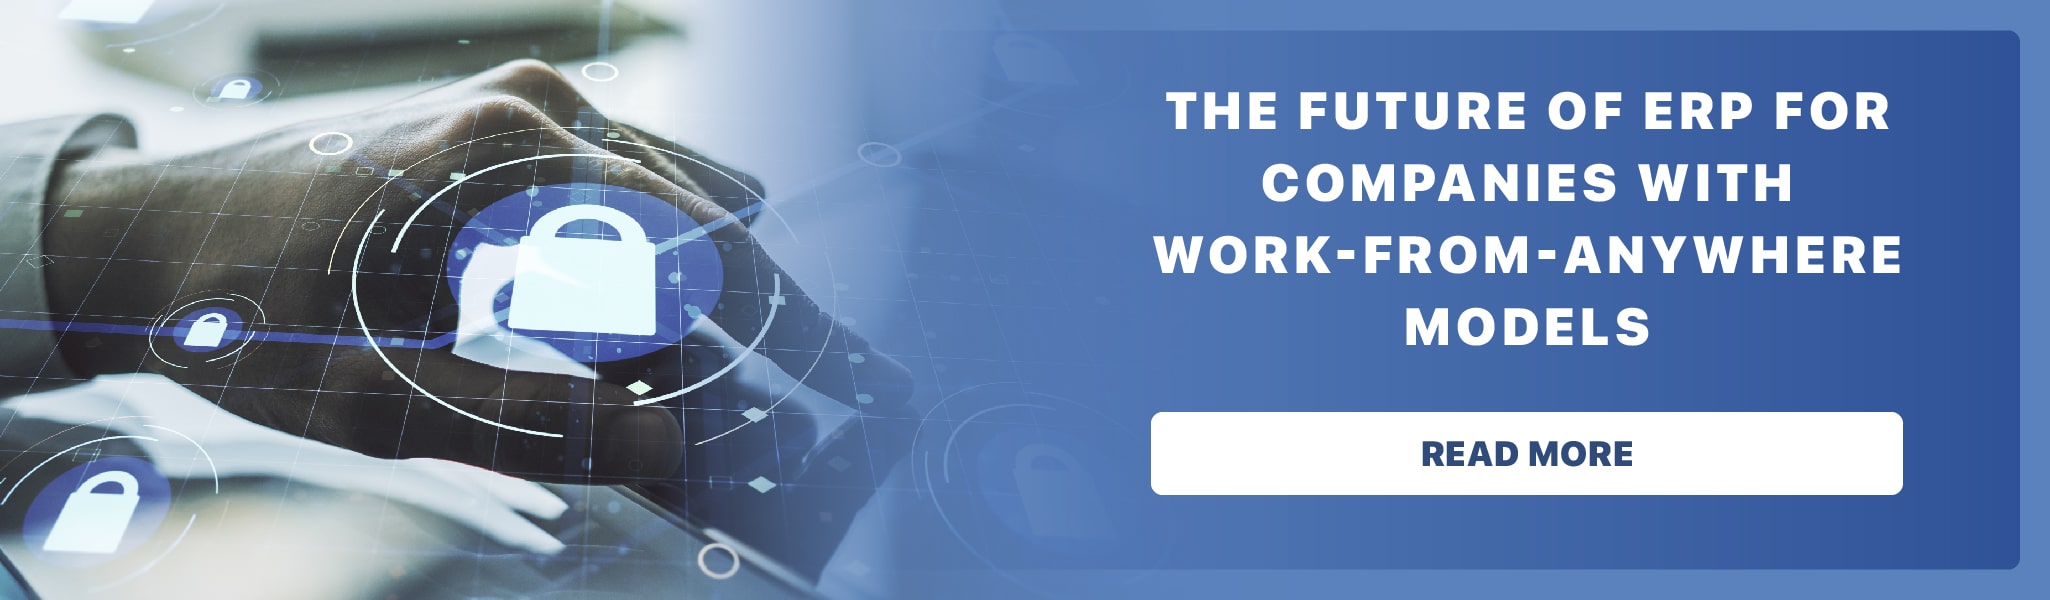 The Future of ERP for Companies with Work-From-Anywhere Models